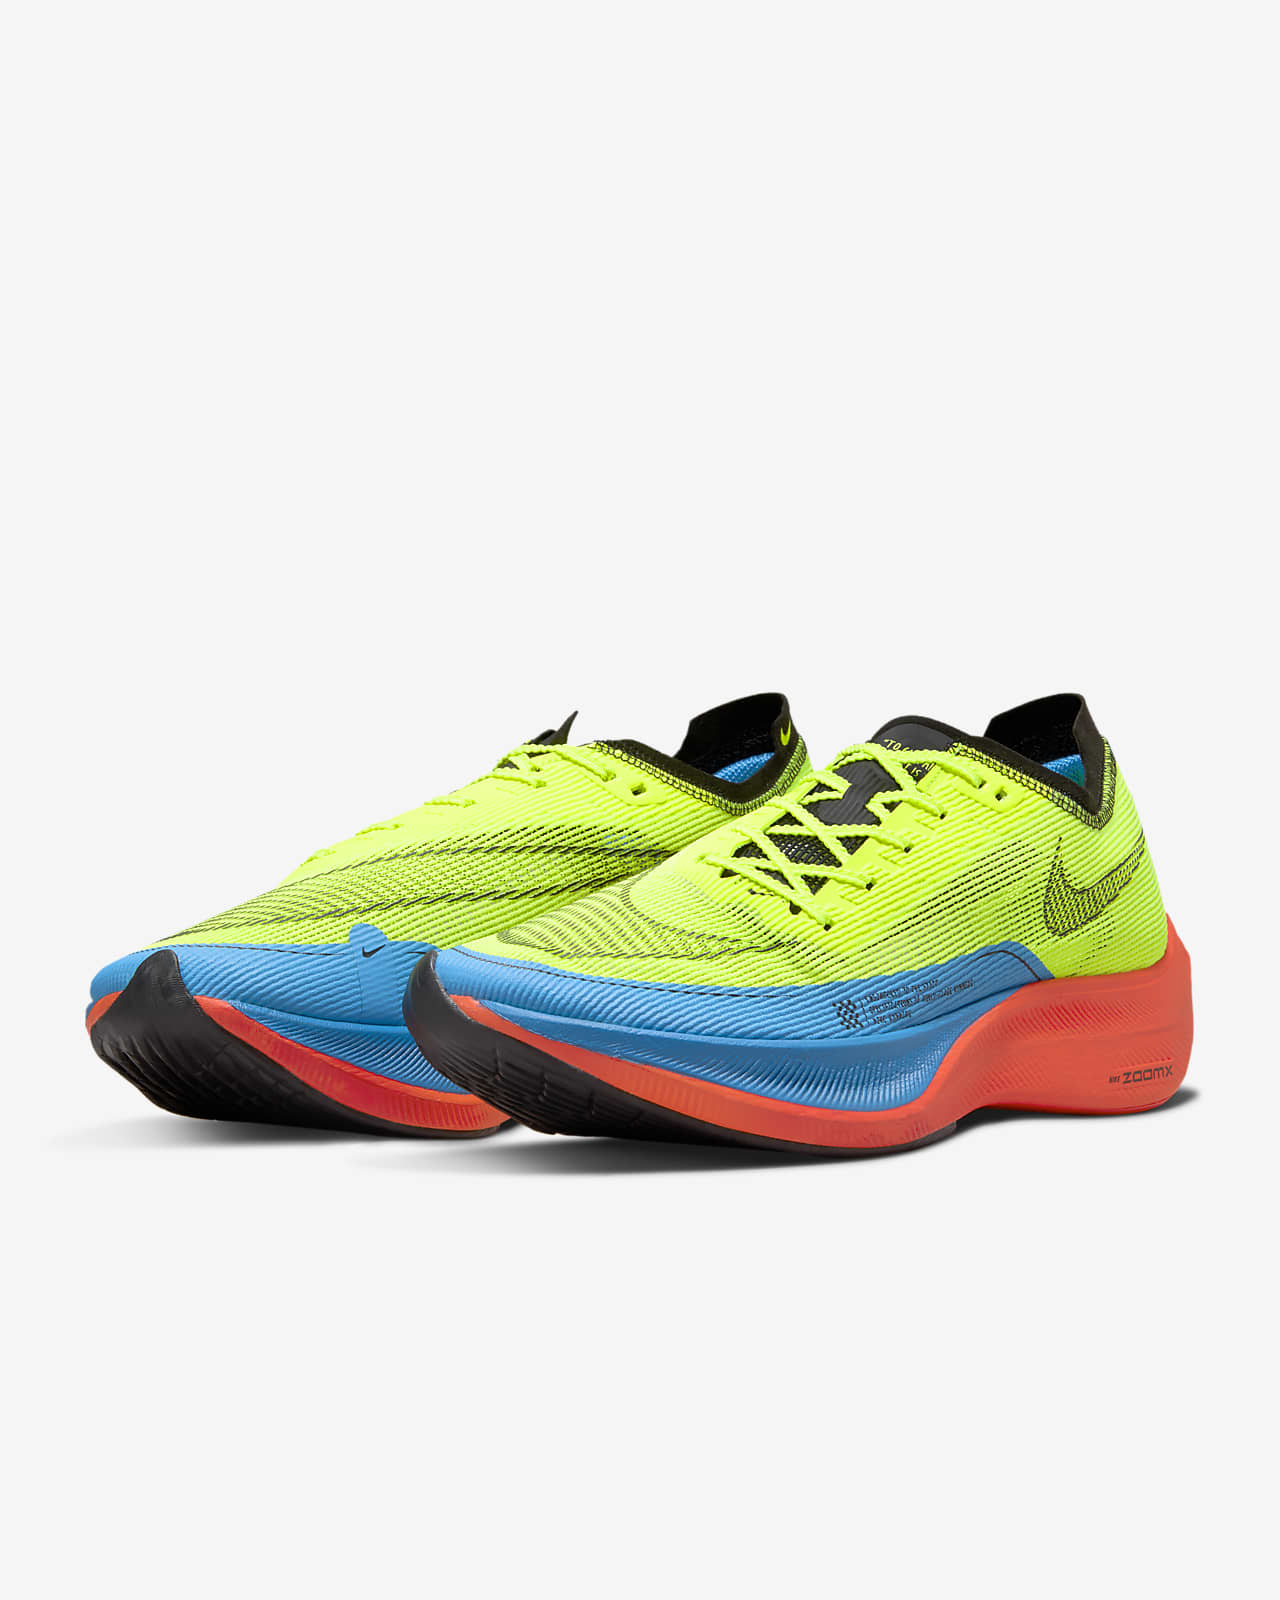 Children Center Pull out Thaw, thaw, frost thaw Nike Vaporfly 2 Men's Road Racing Shoes. Nike SA